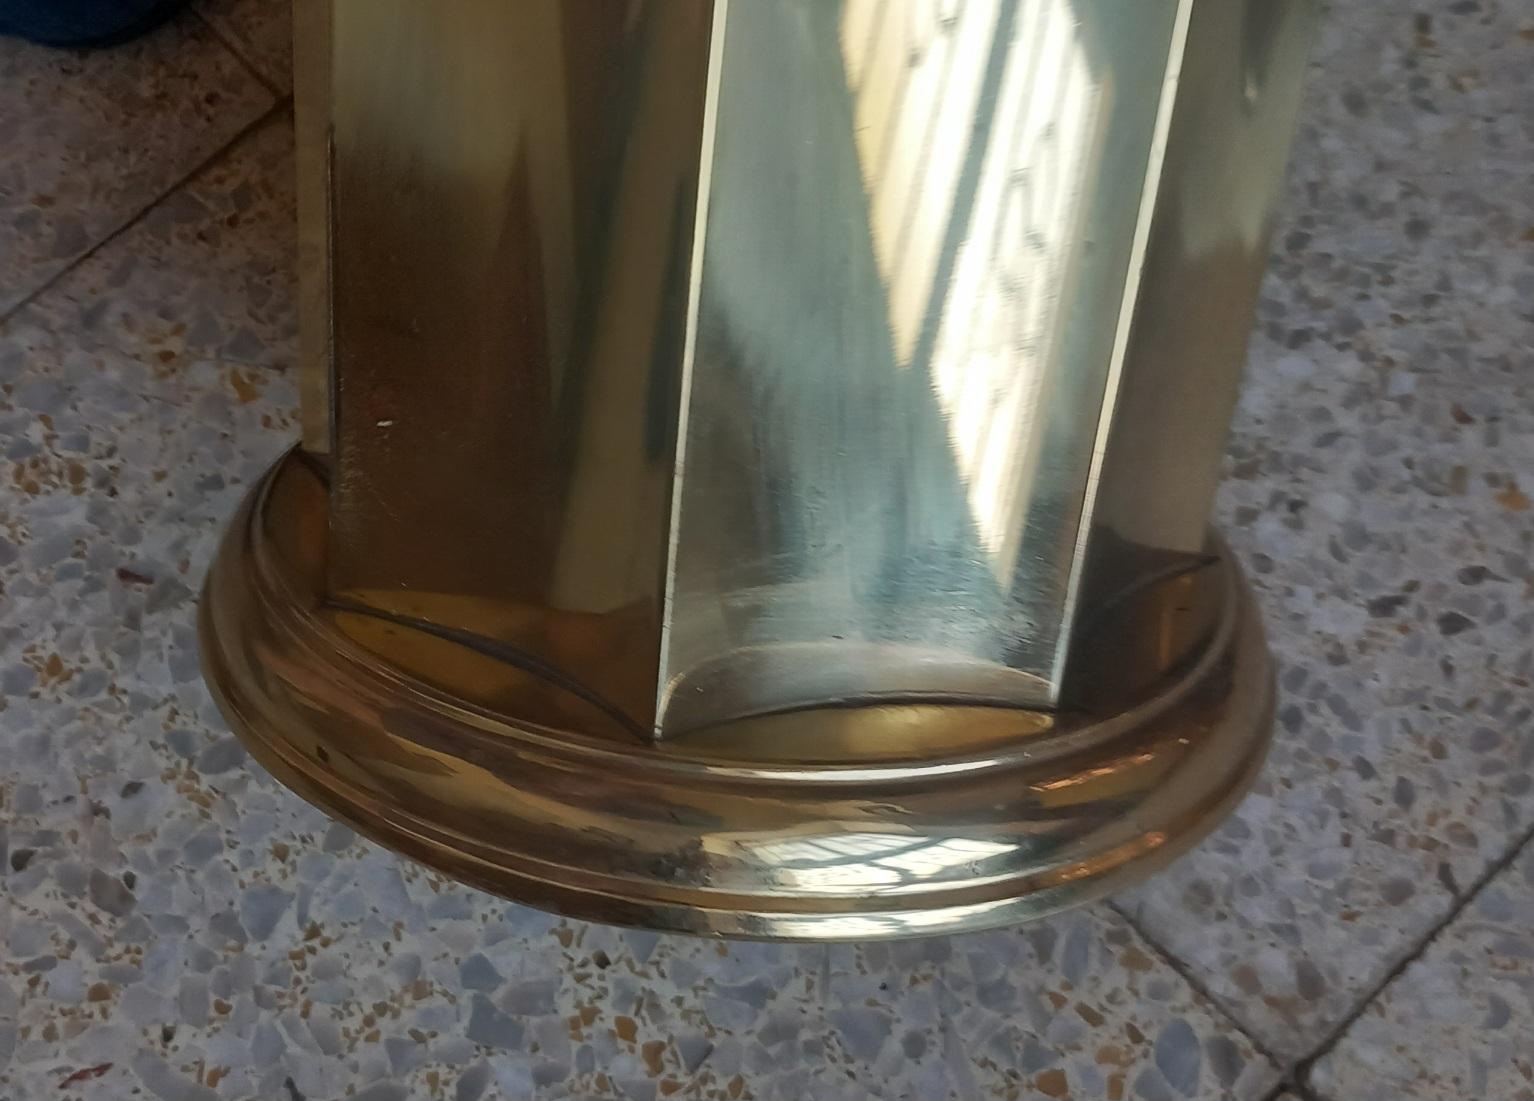  Brass Umbrella Stand, Mid Century Modern 50s In Good Condition For Sale In Mombuey, Zamora